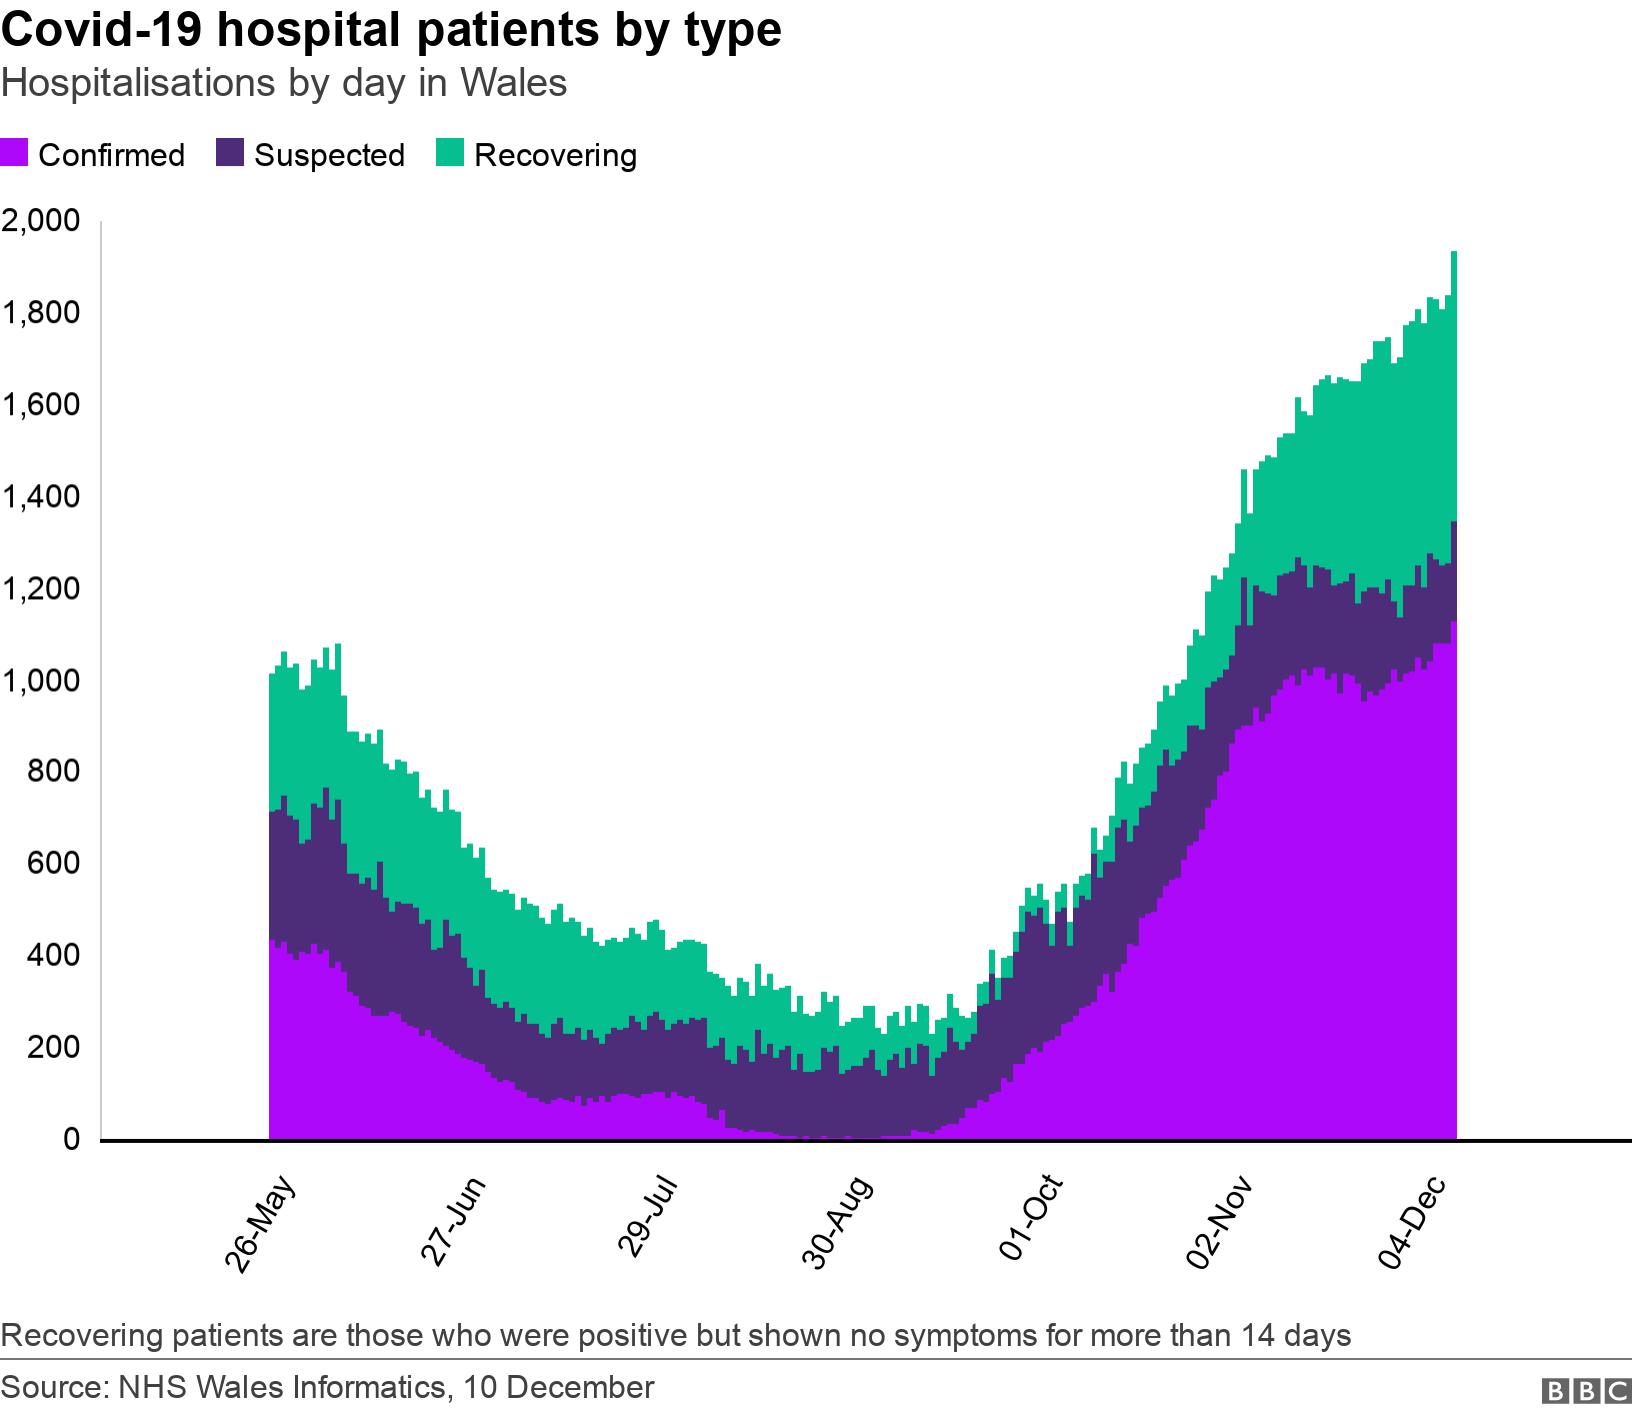 Covid-19 hospital patients by type. Hospitalisations by day in Wales. Recovering patients are those who were positive but shown no symptoms for more than 14 days.